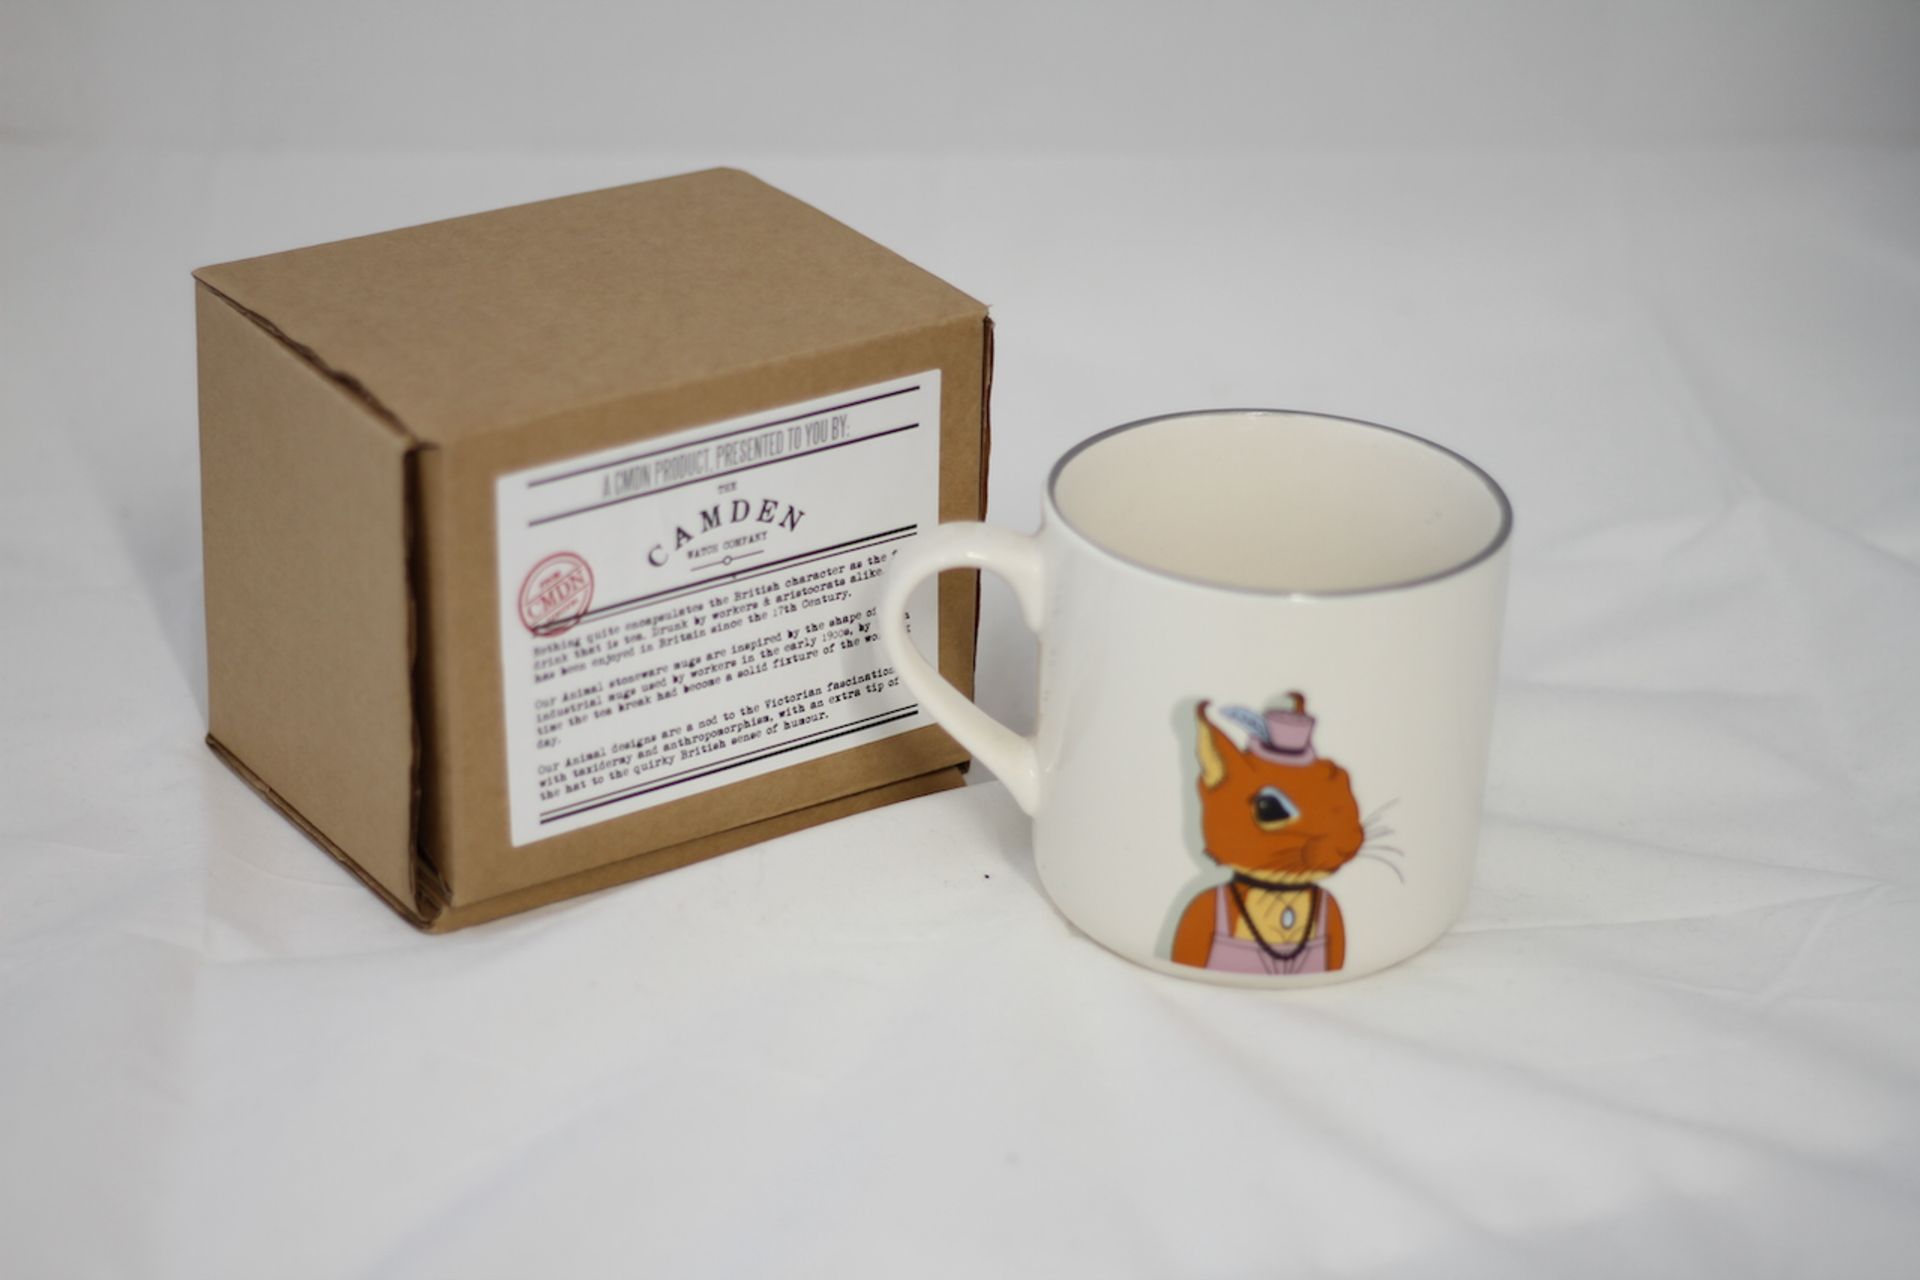 CAMDEN WATCH COMPANY GIRL SQUIRREL MUG SEALED NEW, Colour : WHITE, AGE: UNKNOWN, SIZE: UNKNOWN,